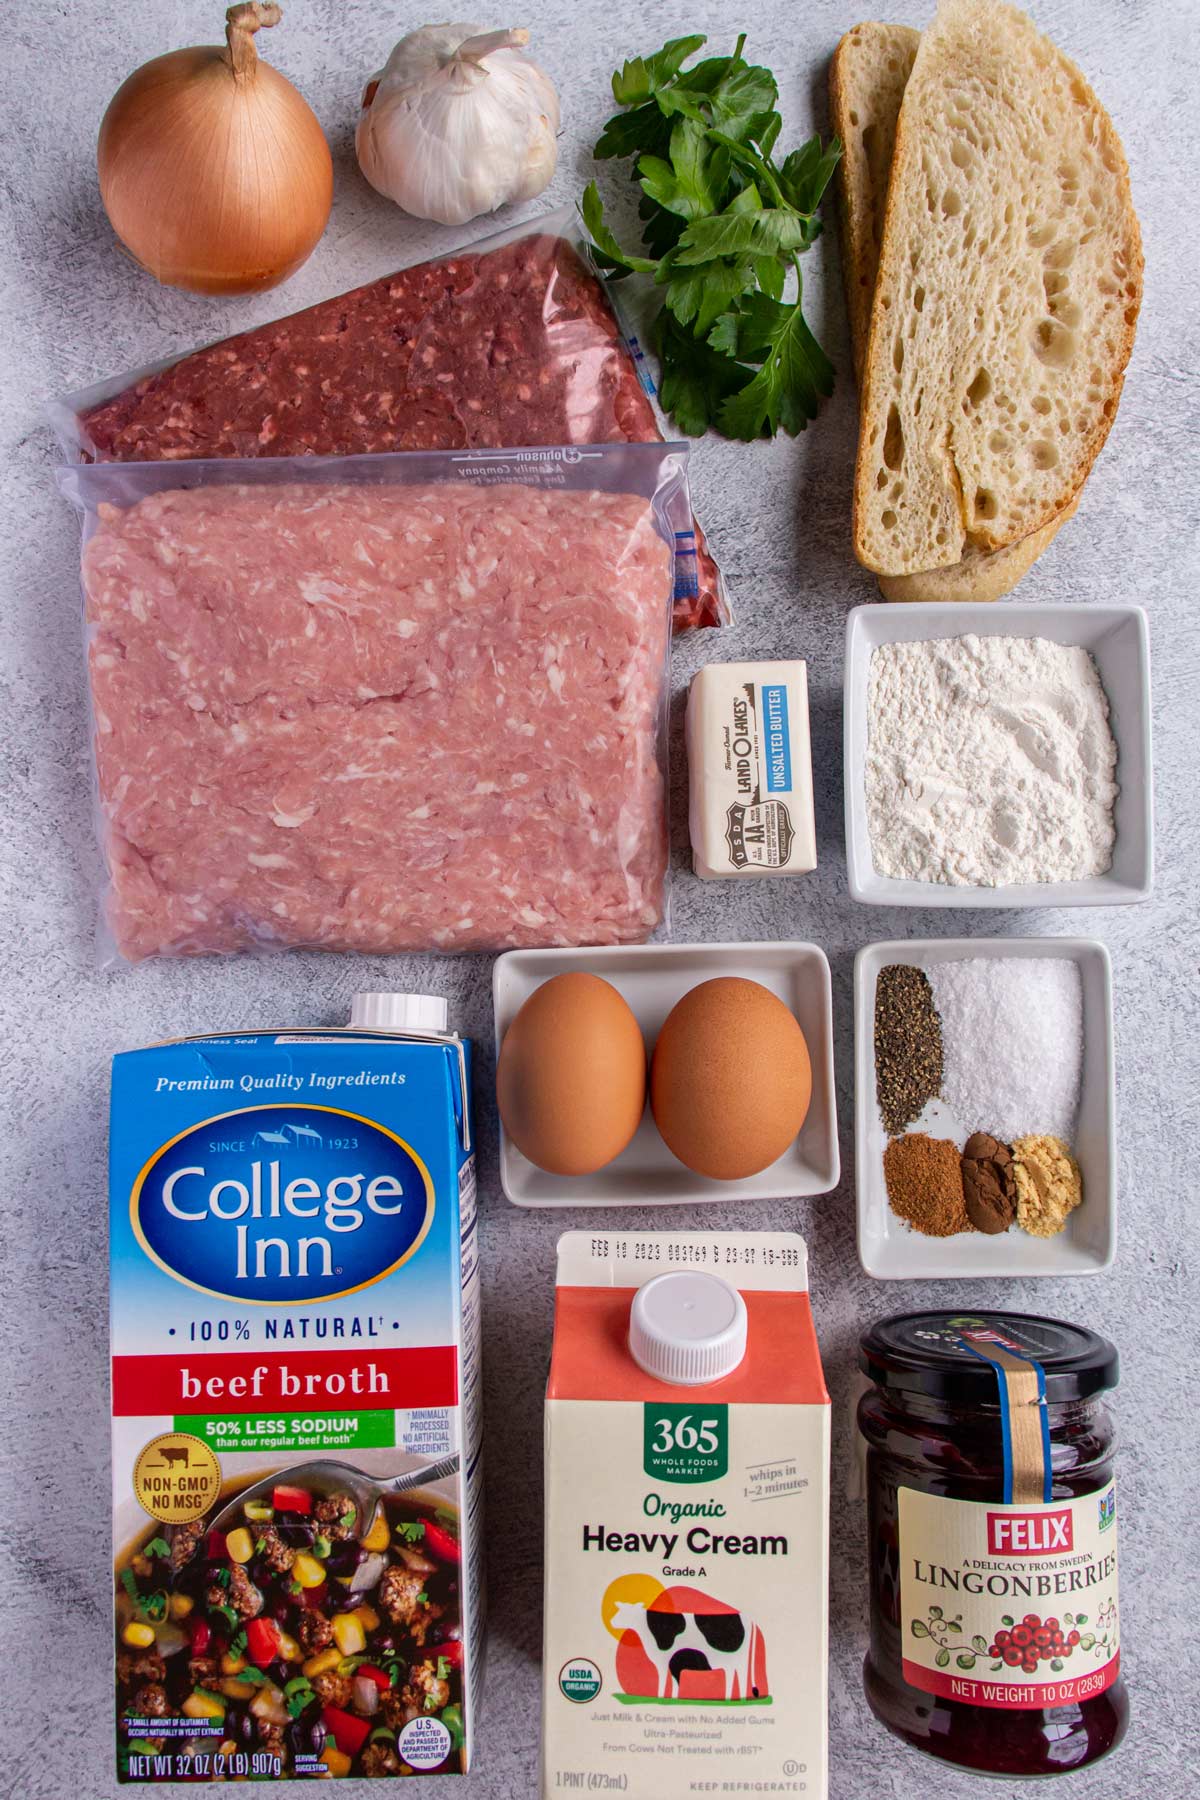 Ingredients for Swedish meatballs on a light grey background.